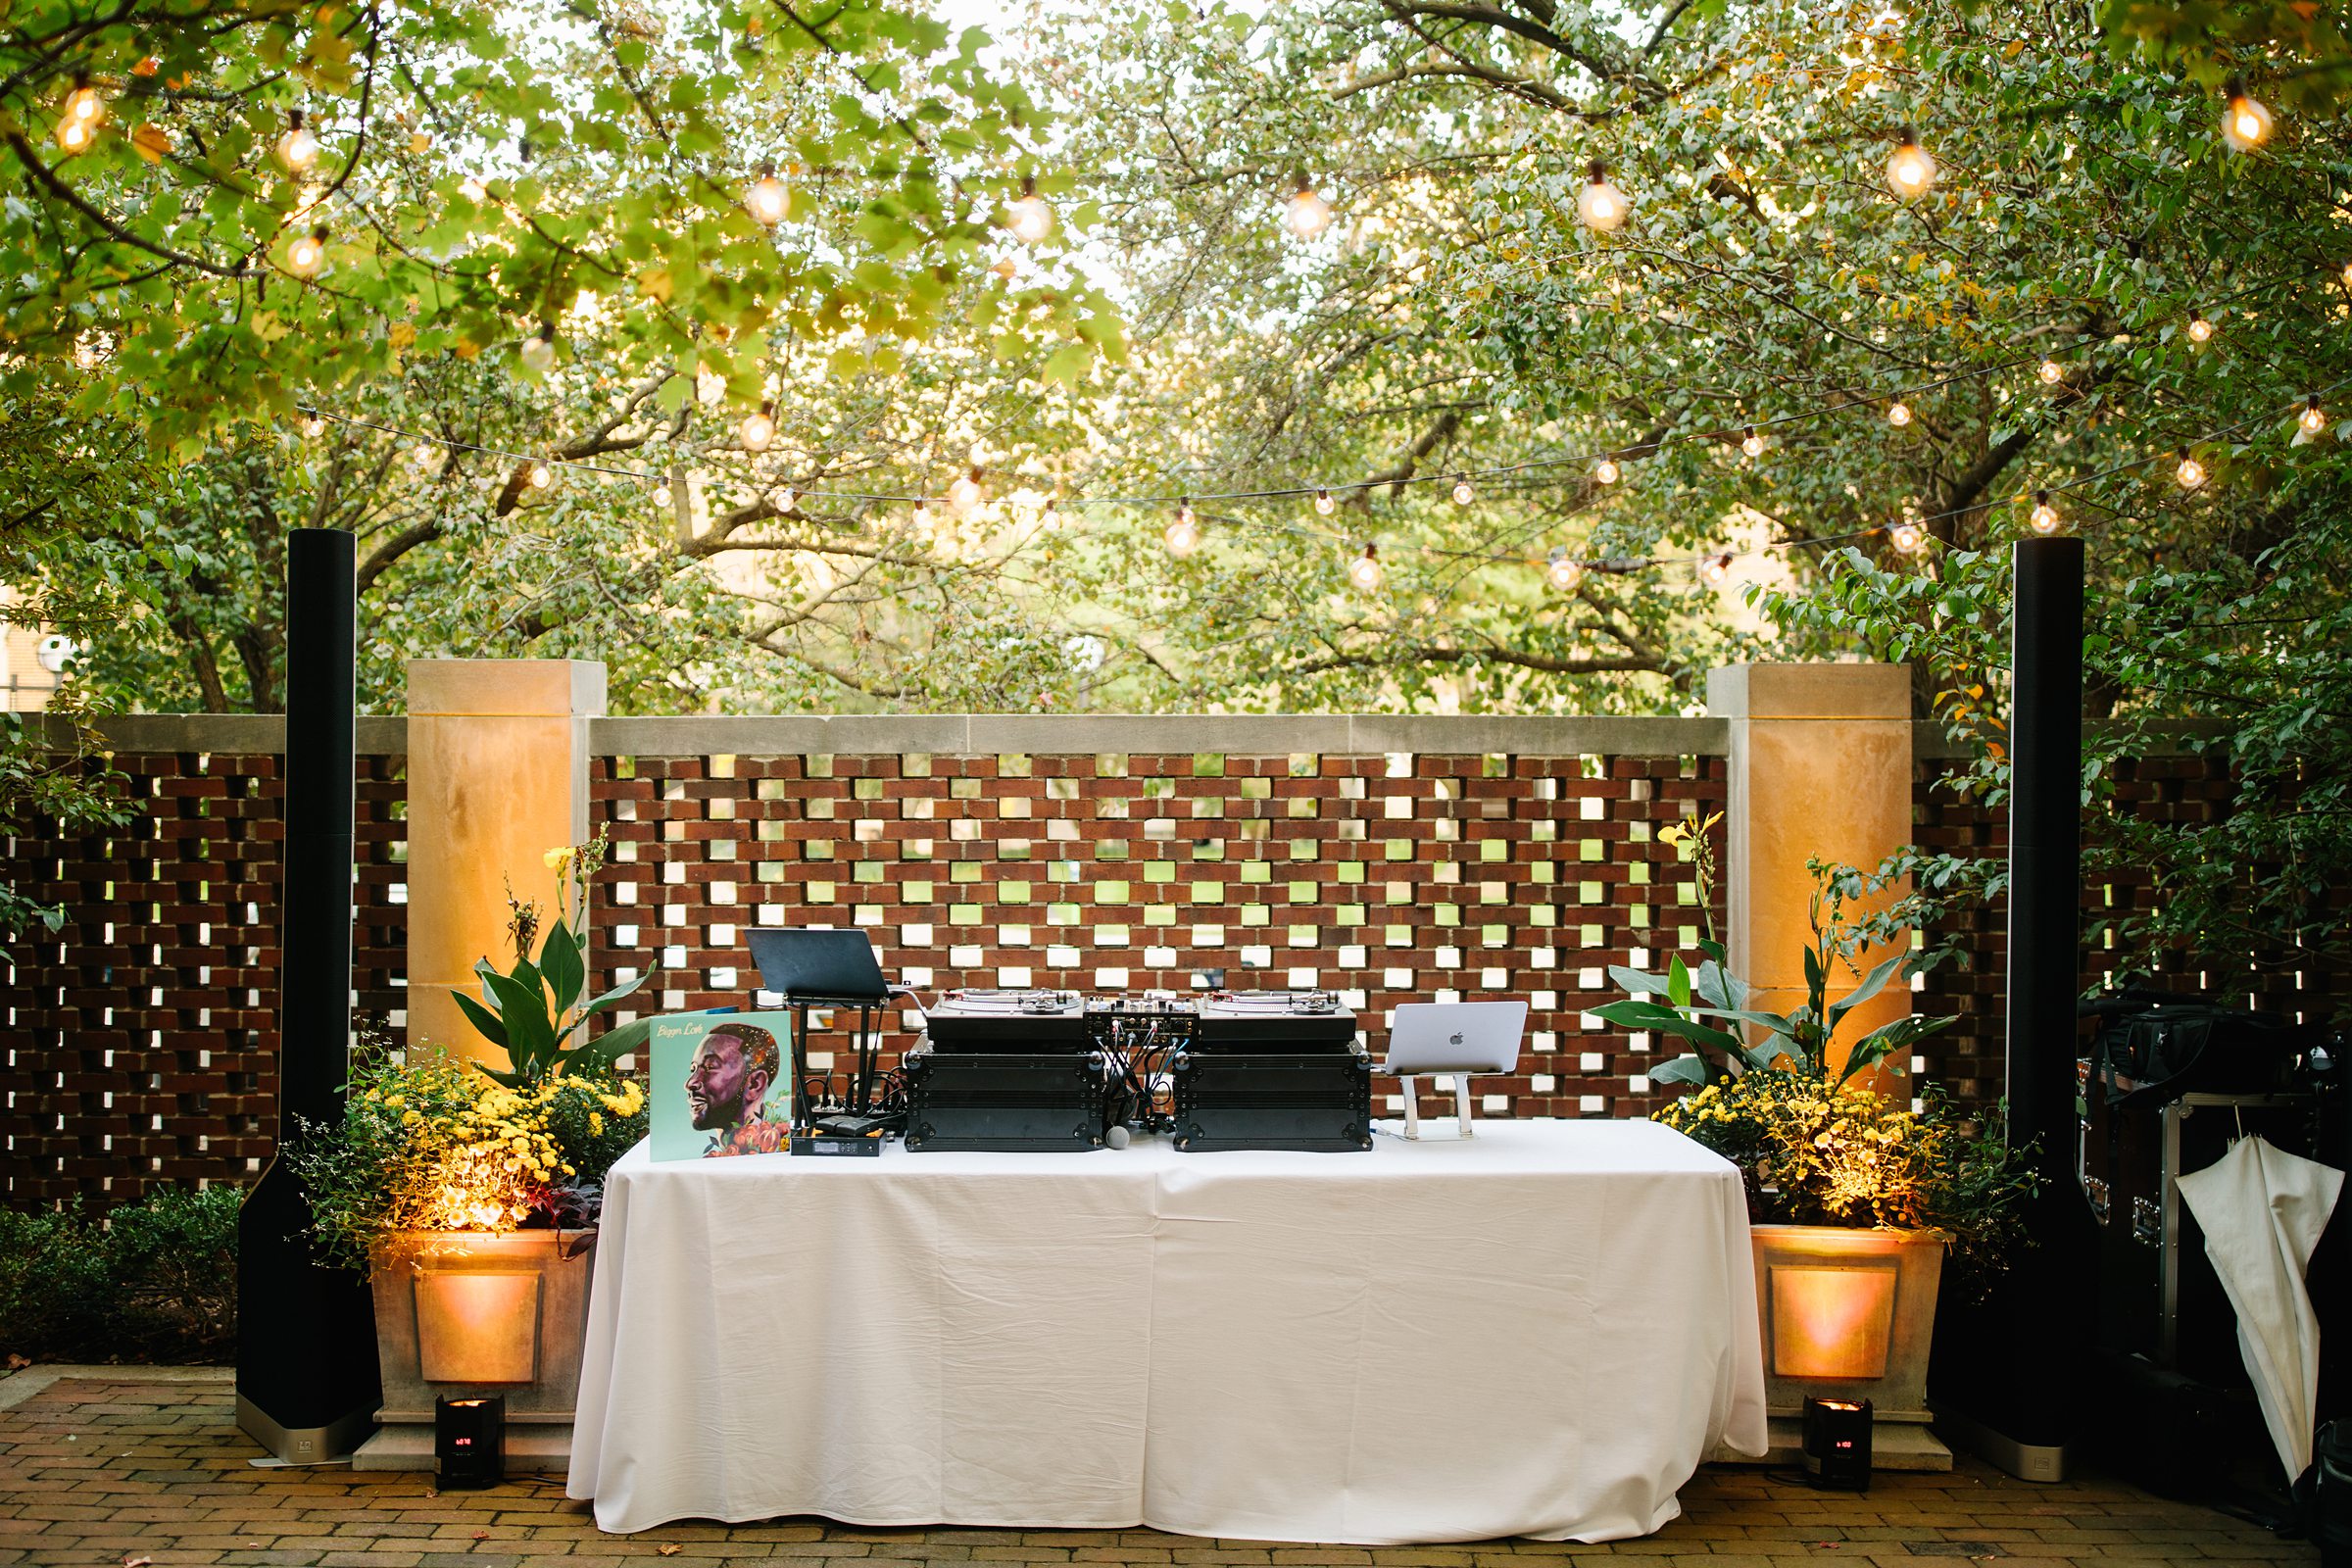 The DJ's outdoor setup sits under trees and cafe lights for The Inn at the Michigan League Wedding reception by Detroit Wedding Photographer Michele Maloney